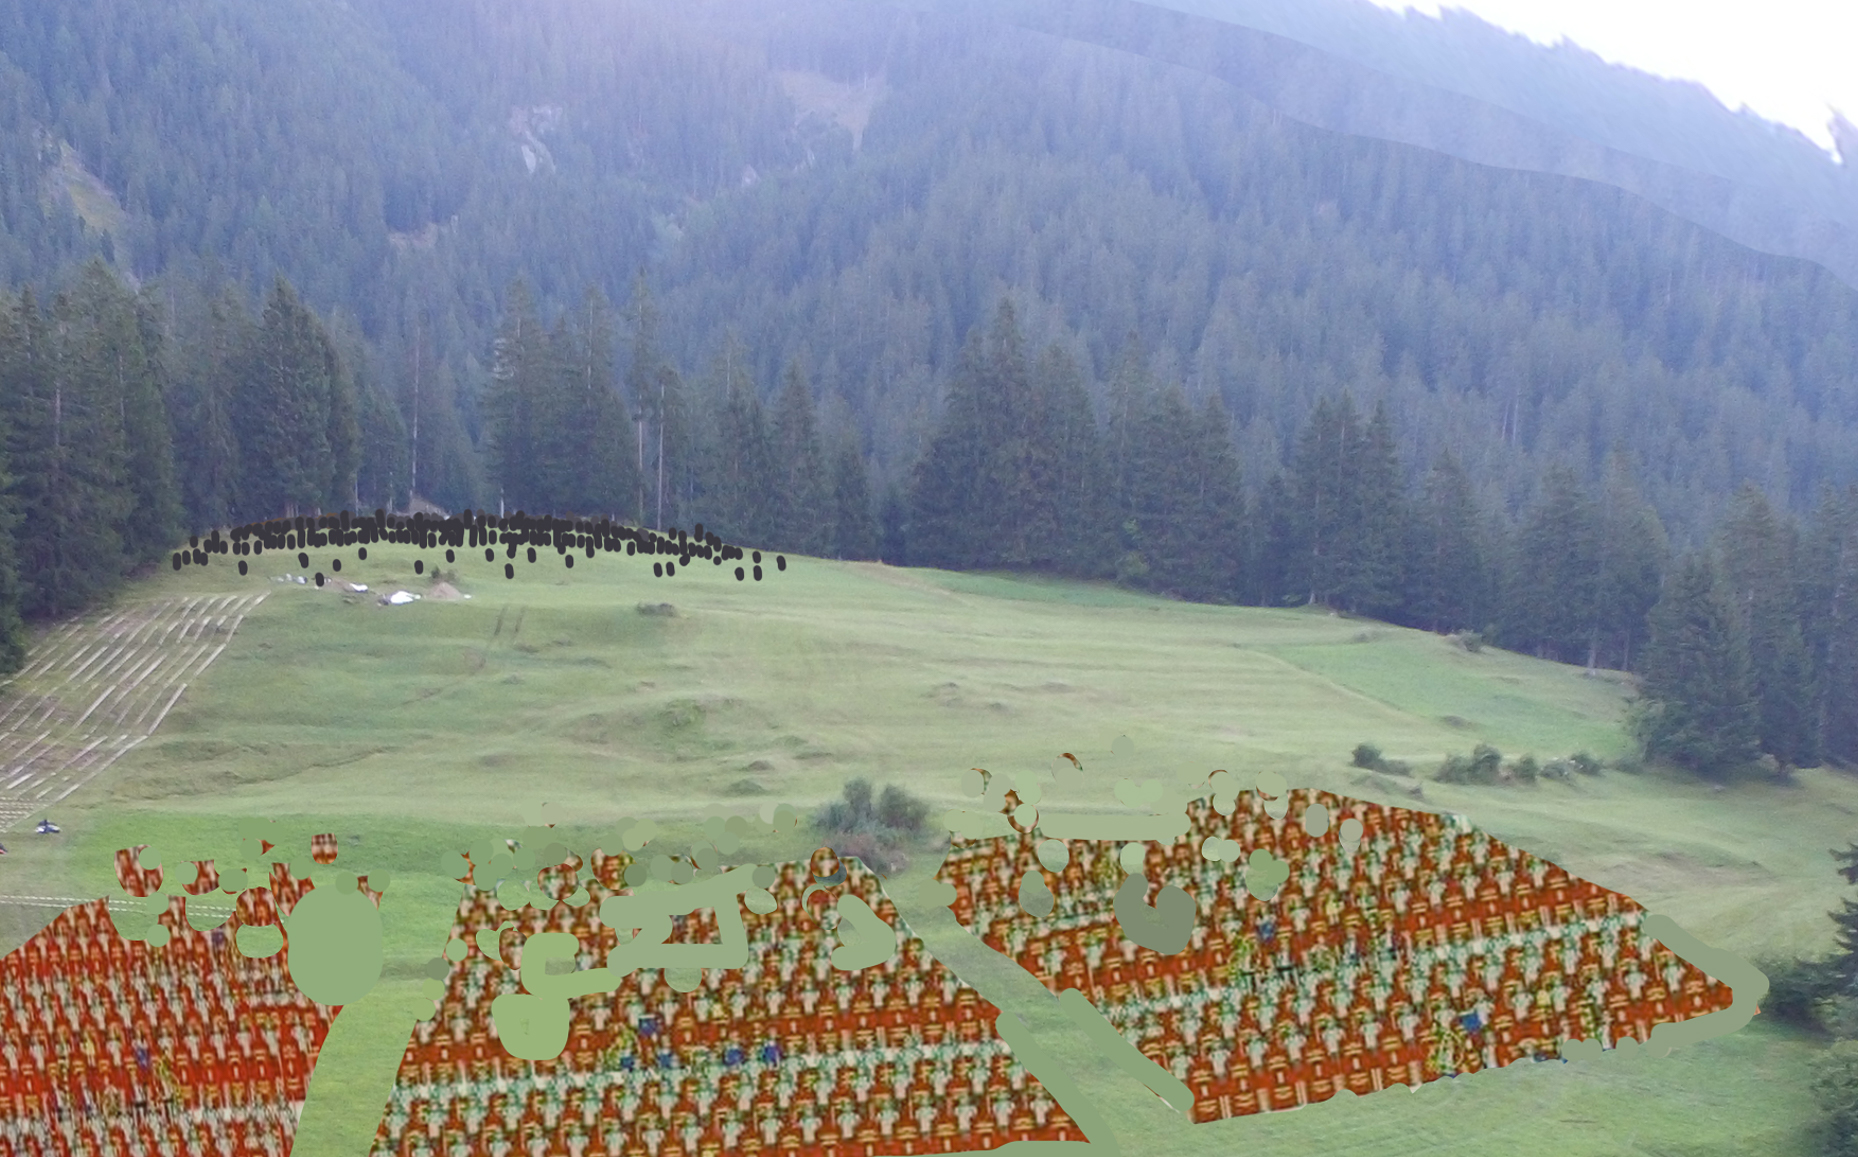 Image showing distribution of fighters on Roman battlefield in Switzerland.